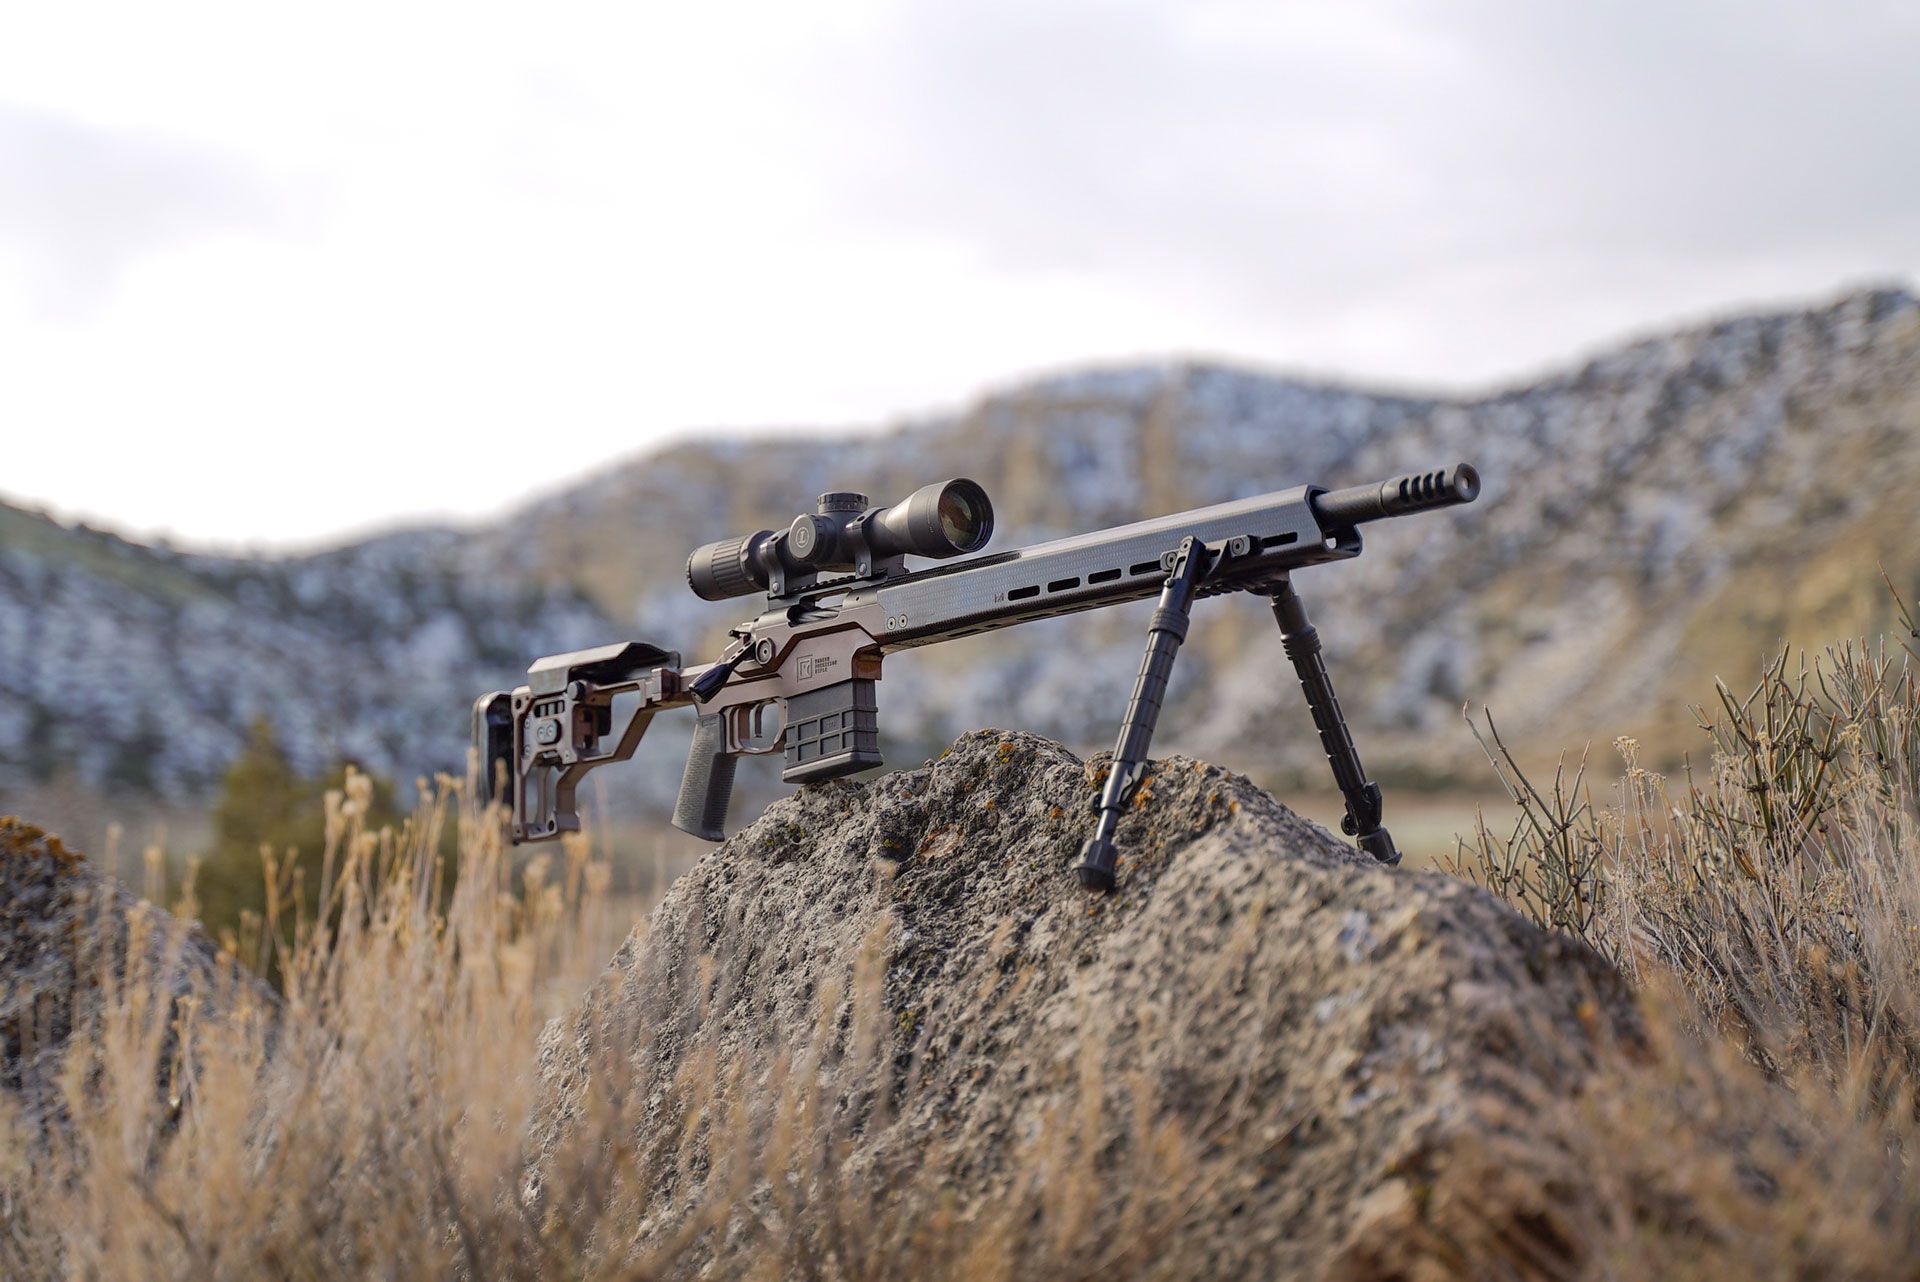 New for 2019, Christensen Arms has expanded the Modern Precision Rifle color options to include a Desert Brown™ anodized chassis.  The new color offers customers an alternative to the standard black hardcoat anodize, while retaining the durability of the anodize finish.  